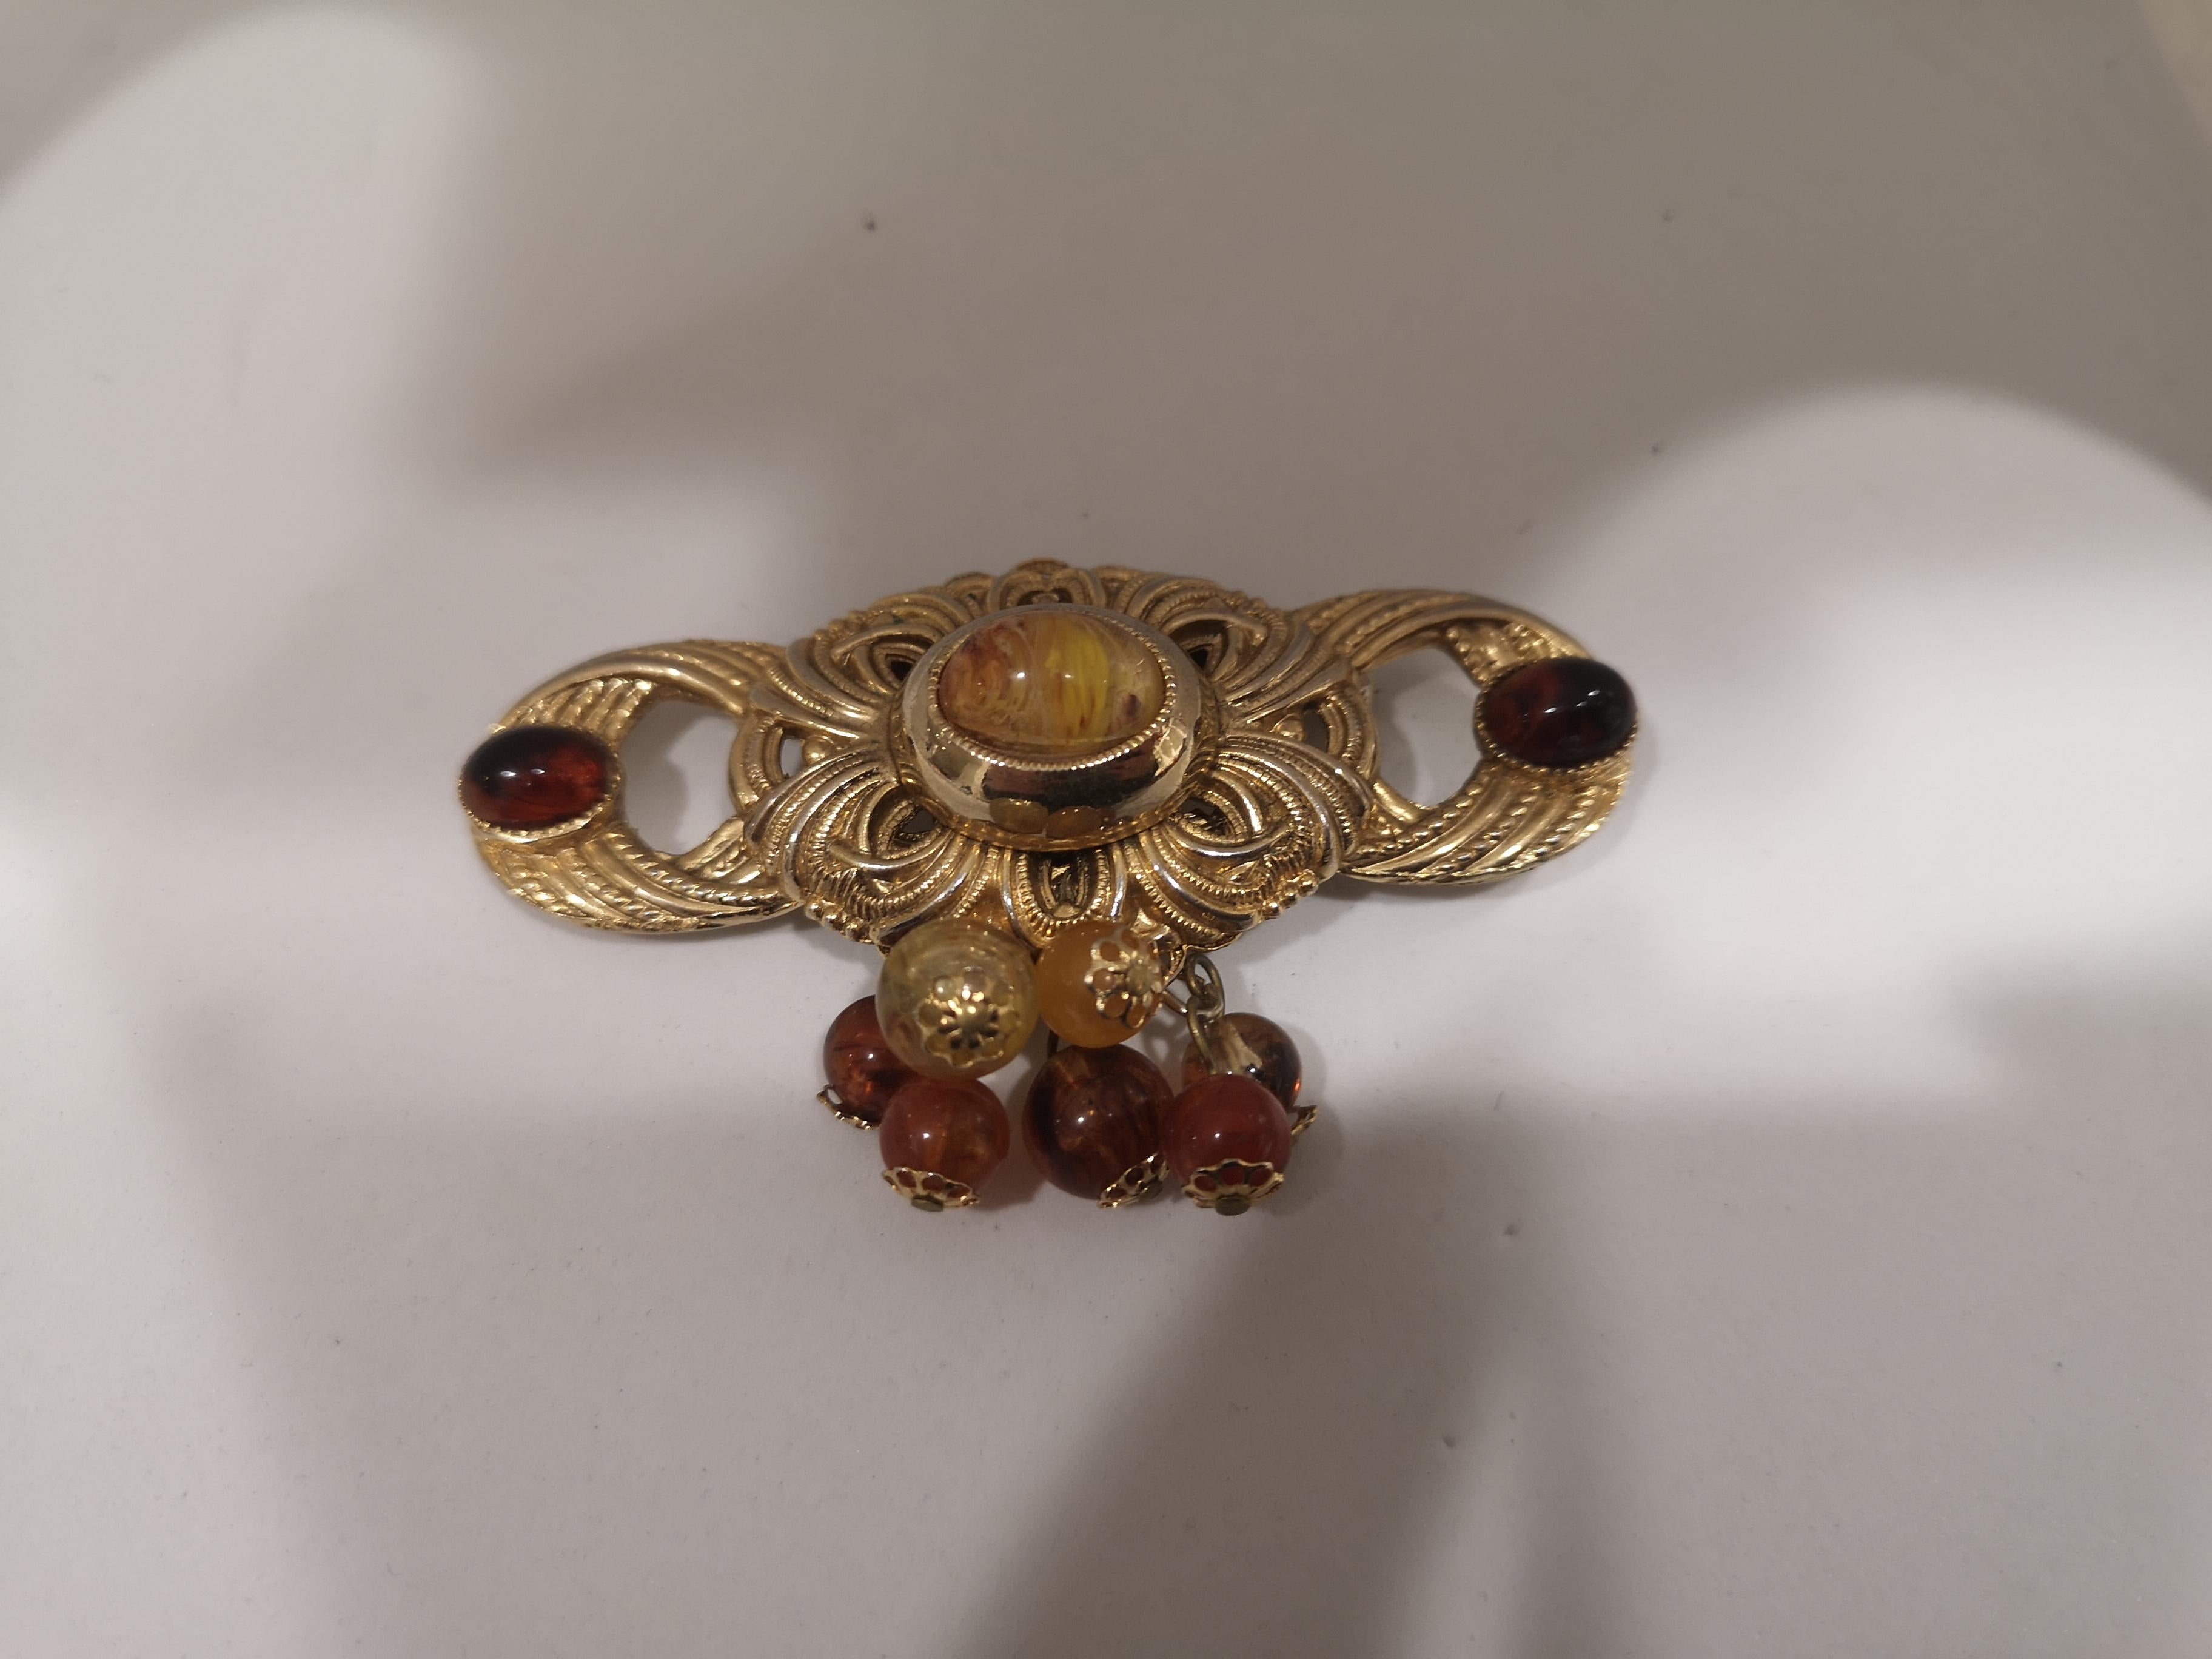 Vintage gold tone with amber stones brooch
8x4 cm